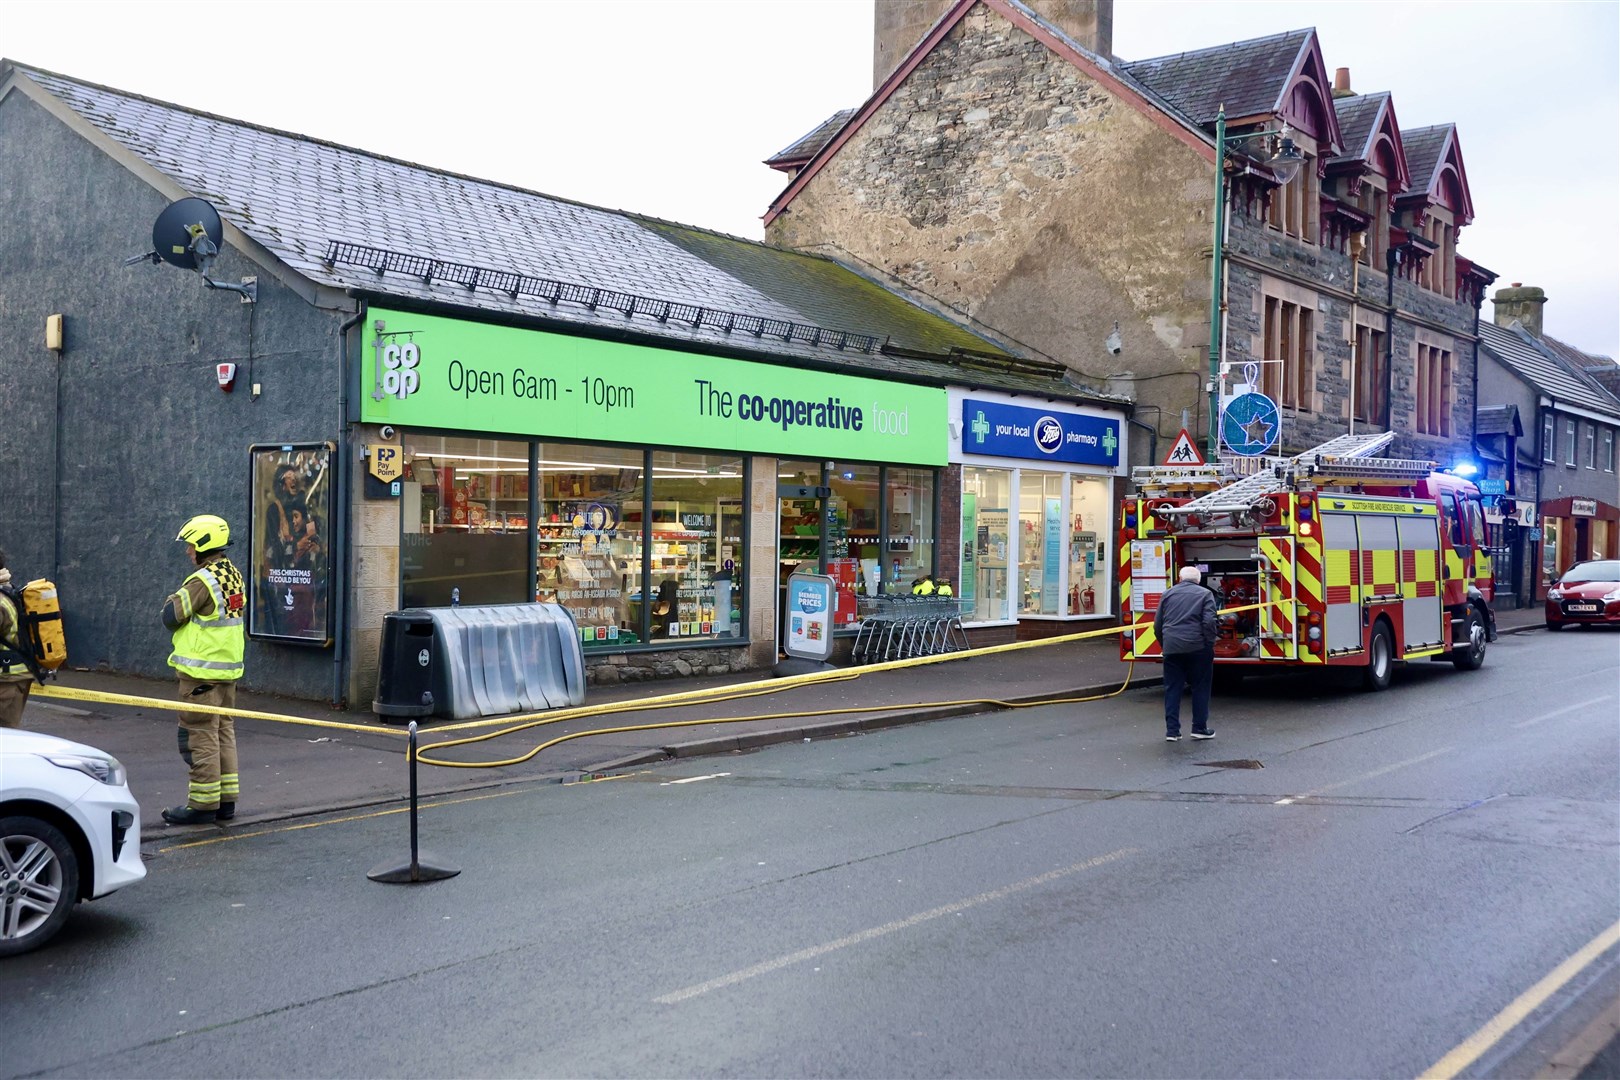 Checks were quickly made on one of the shop's fridges which appeared to be leaking gas.